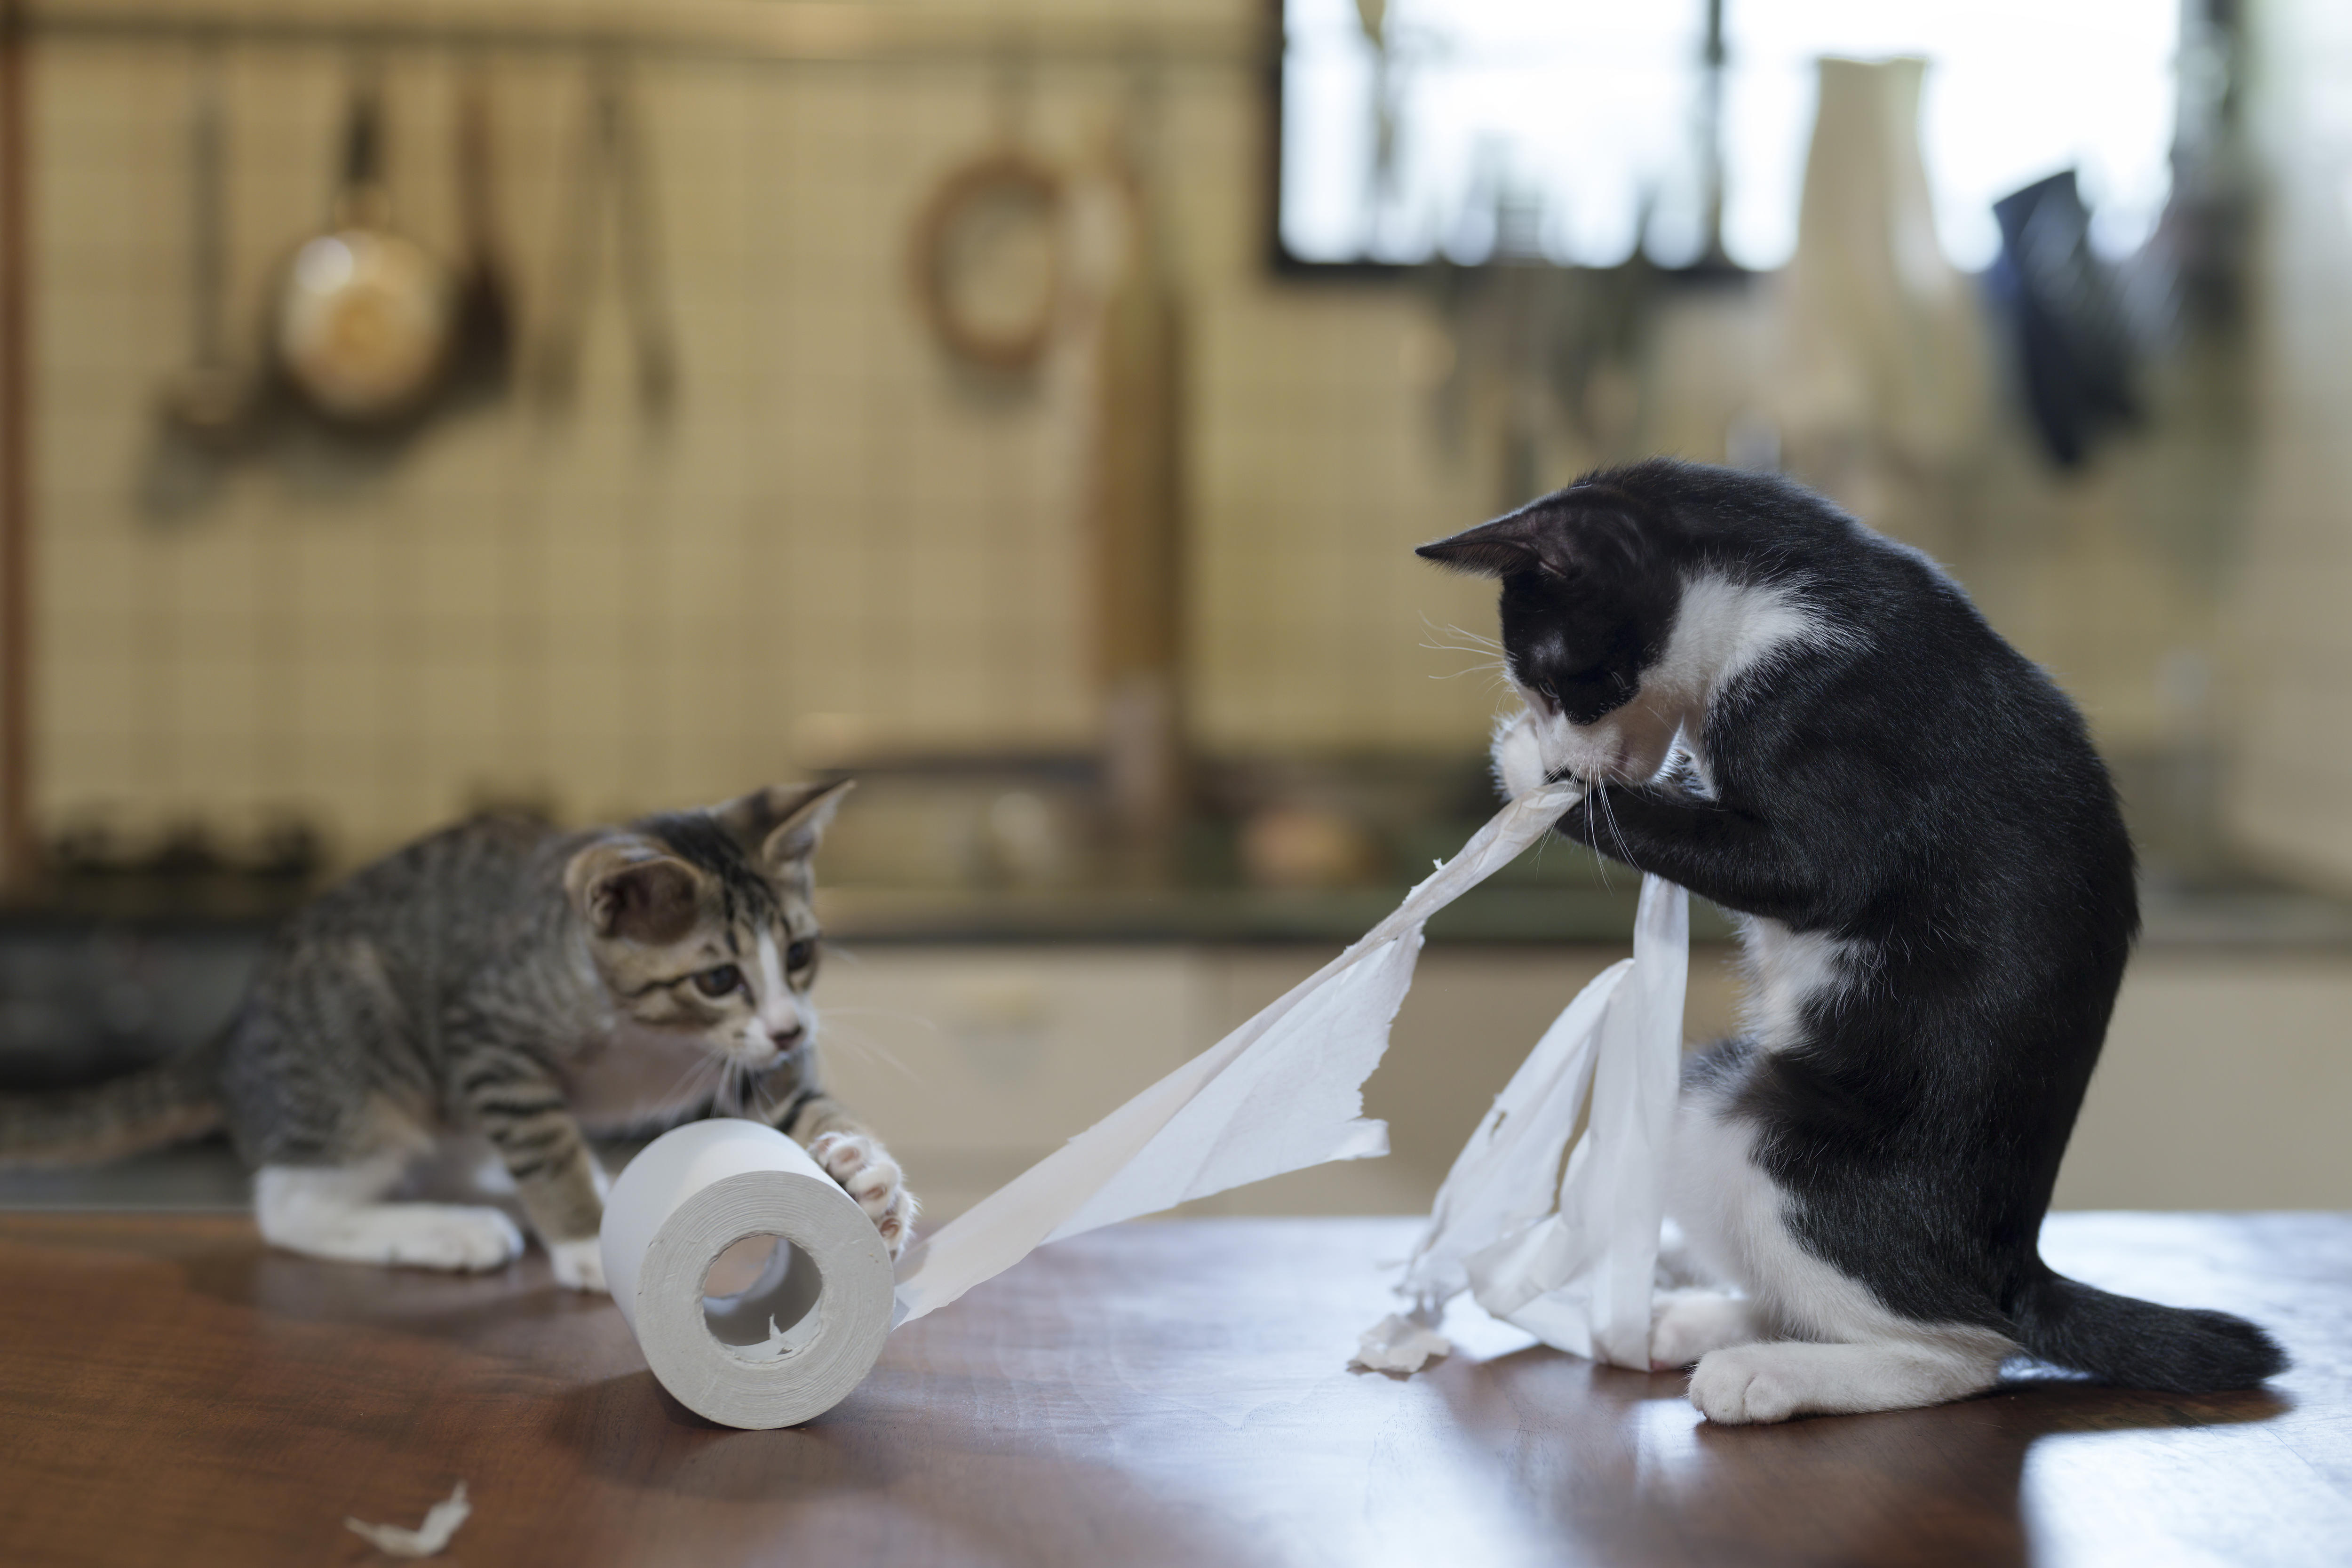 One black and white cat pulling on a toilet roll while the other watches carefully